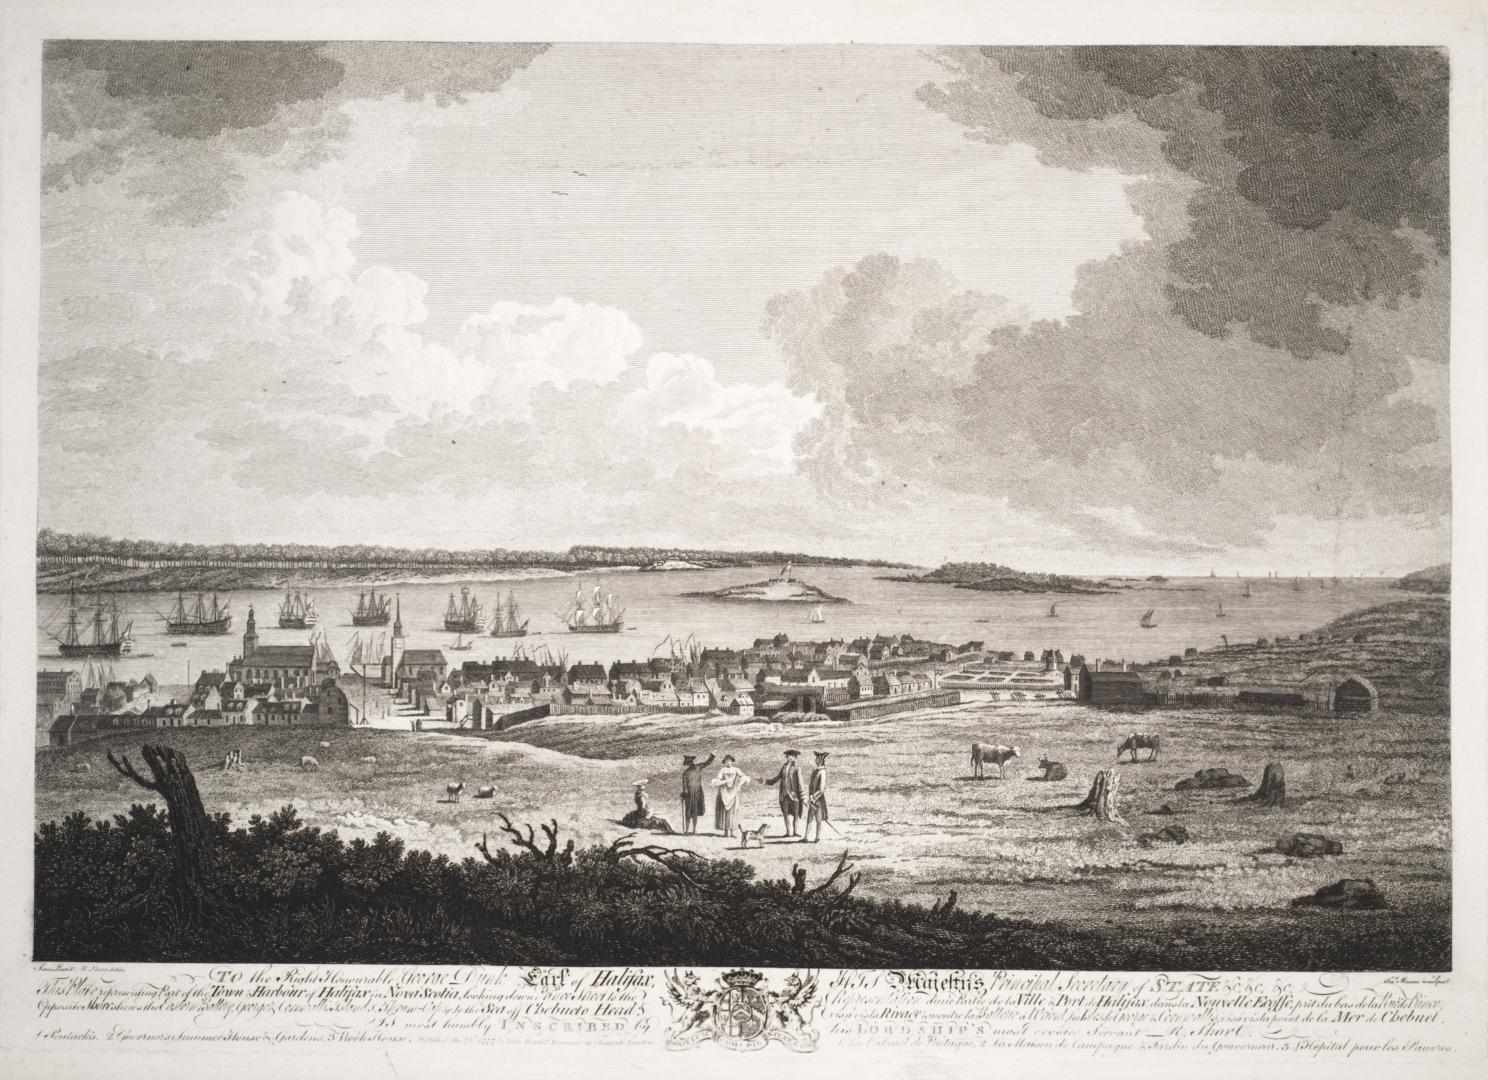 Part of the Town & Harbour of Halifax in Nova Scotia, Looking down Prince Street to the Opposite Shore (1759)